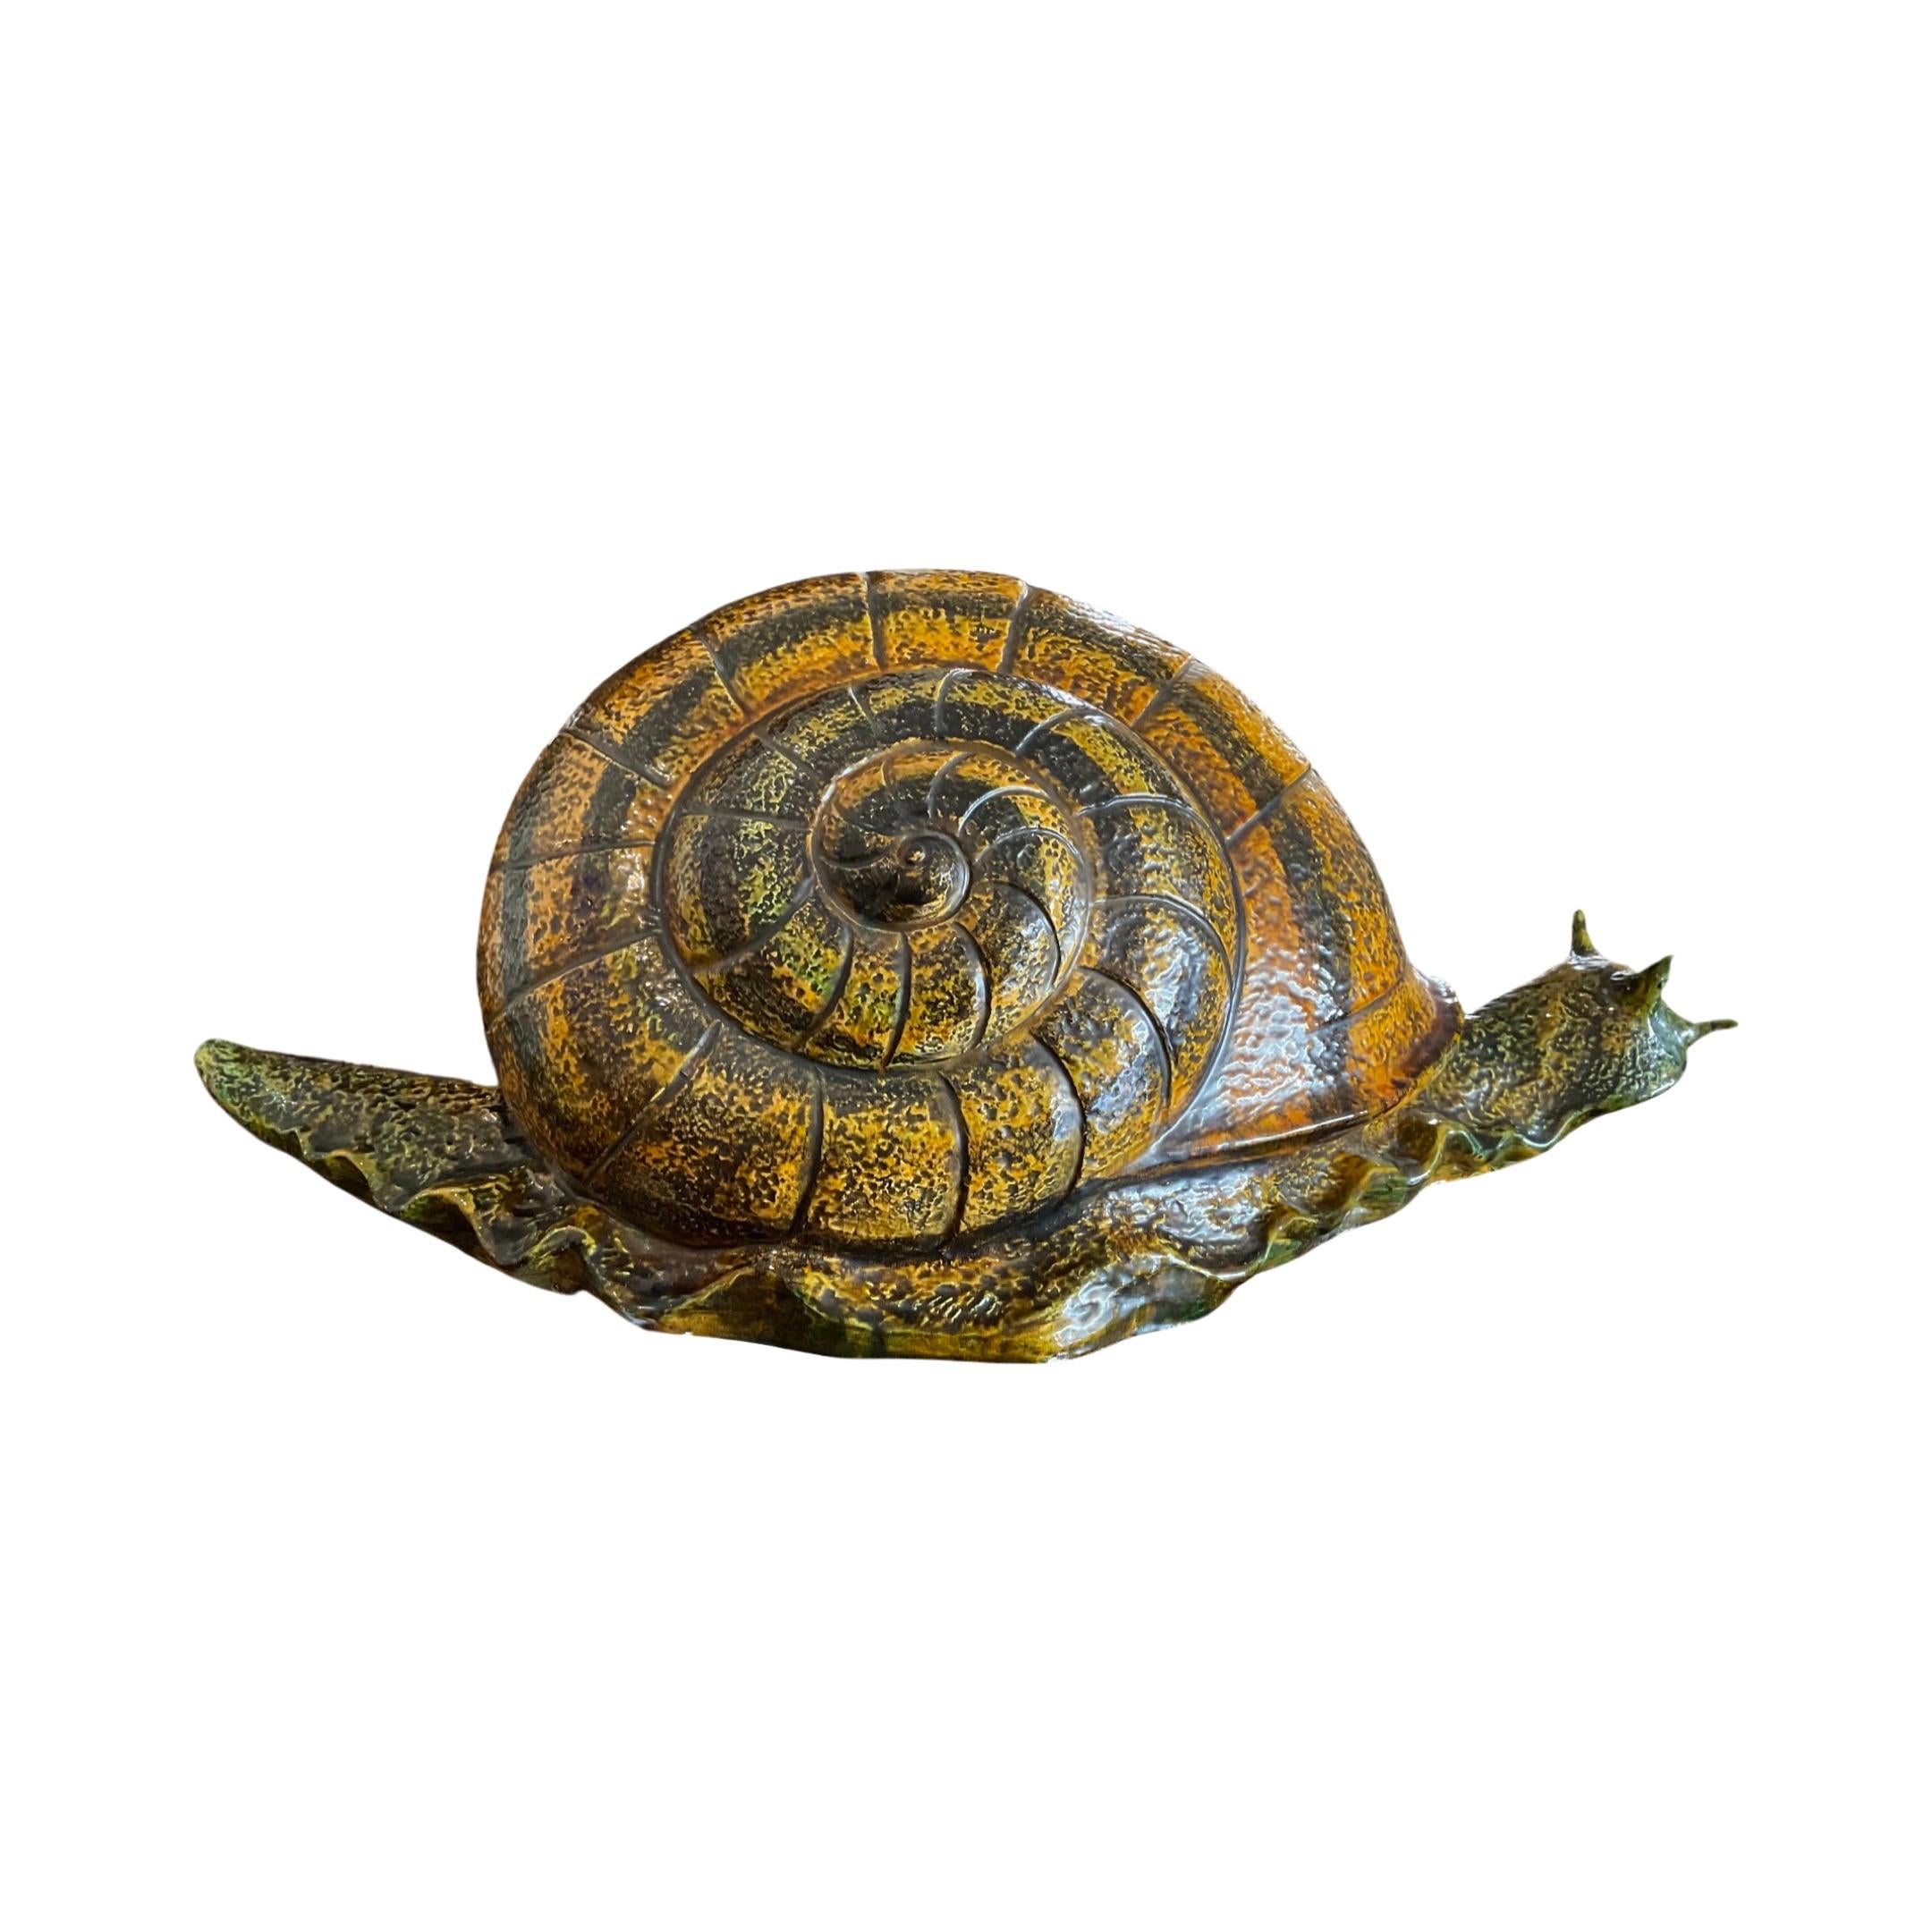 This 19th-century French snail sculpture is a unique piece of art, crafted from a ceramic composite with a glazed finish. Its rustic charm is sure to bring a special touch to your space, making it a perfect addition to any interior.